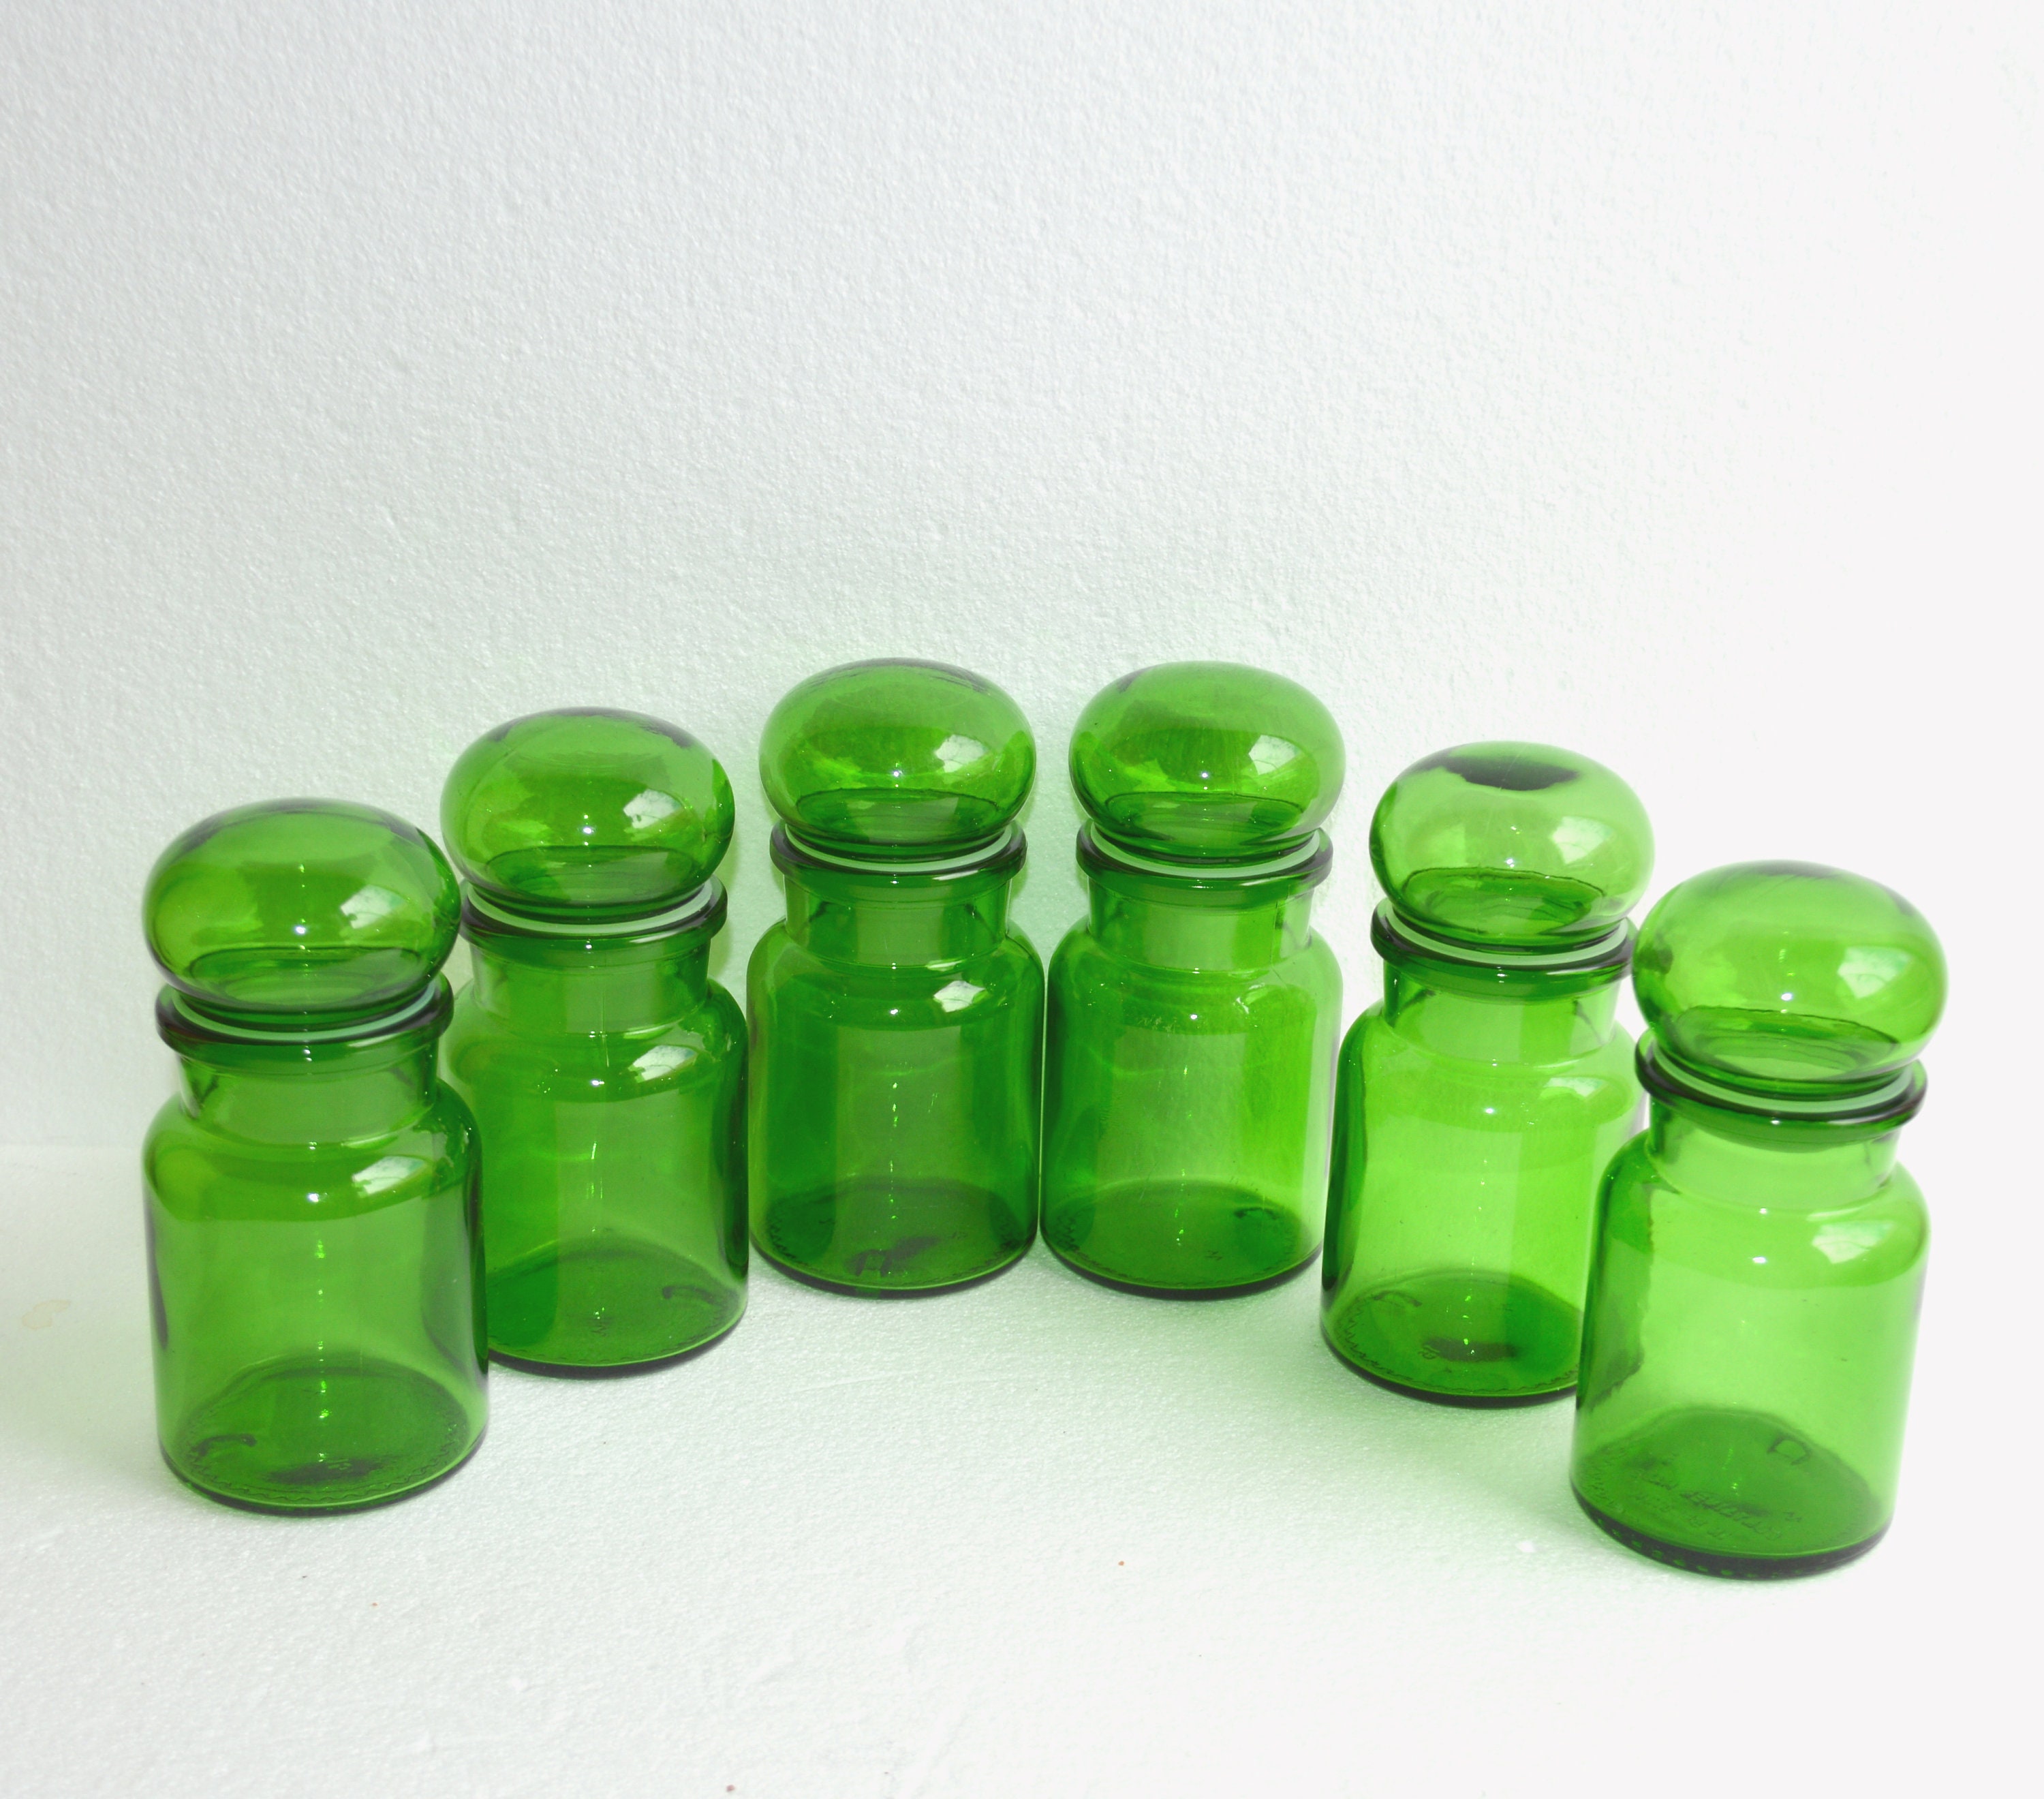 6 Large Square Glass Spice Bottles 6 oz Jars with Silver Metal Lids, Shaker  Tops by SpiceLuxe